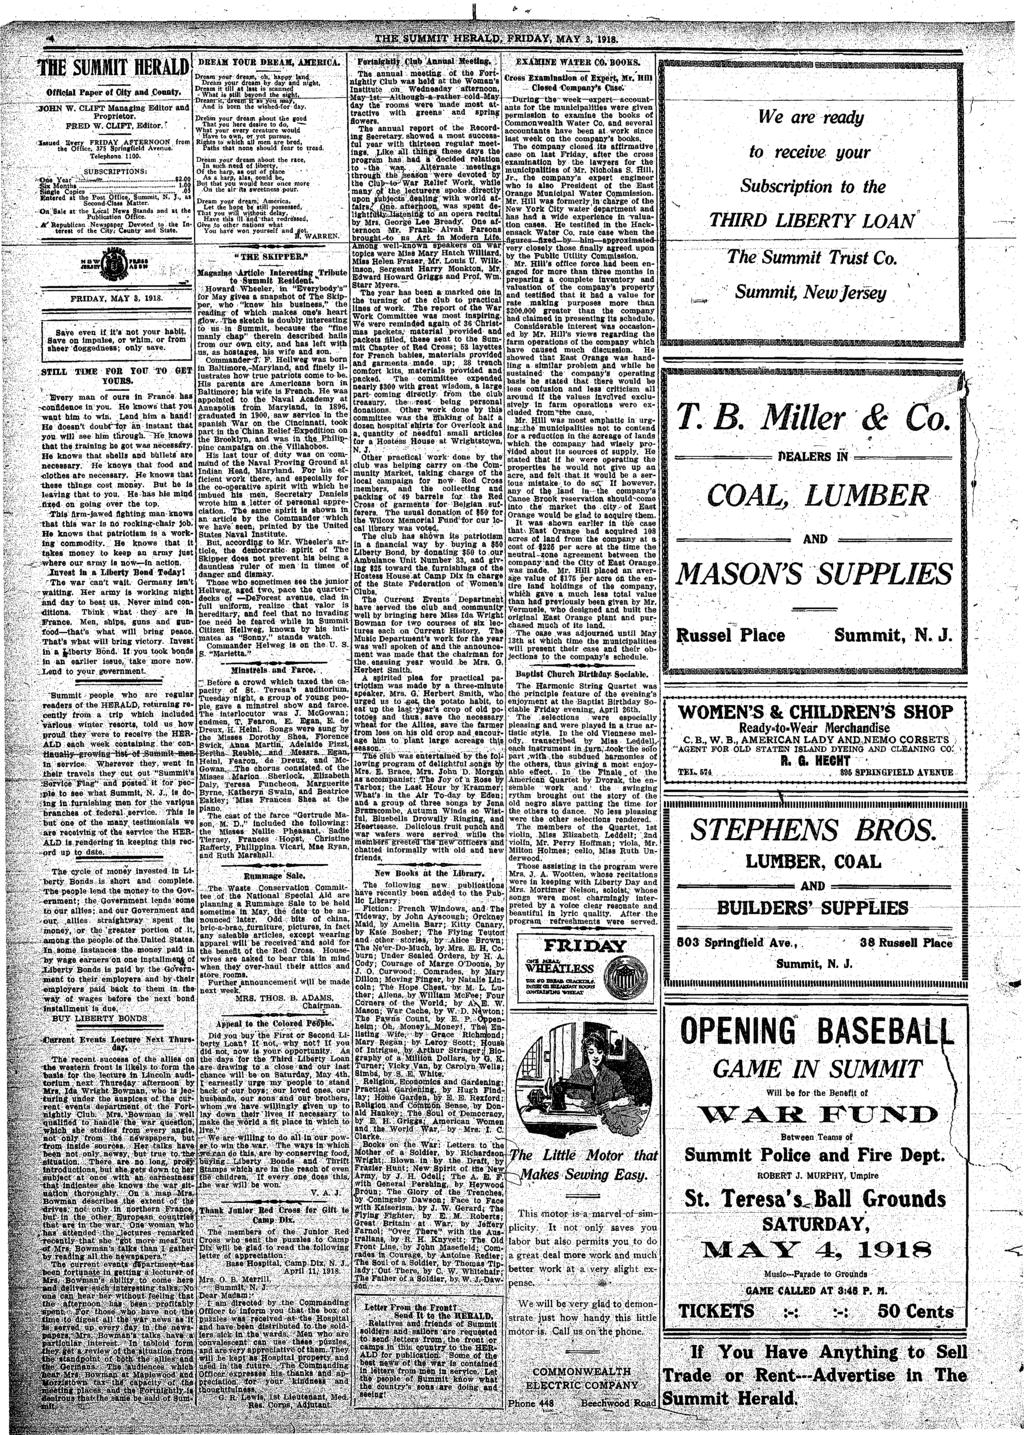 -4 HE SyMMl HERALD, FRIDAY, MAY 3, 58. BE SUMMI HERALD Official Paper of Oiy and.couny. JOHN W. CLIF Managing Edior and Proprieor. FRED W. CLIF, Edior.